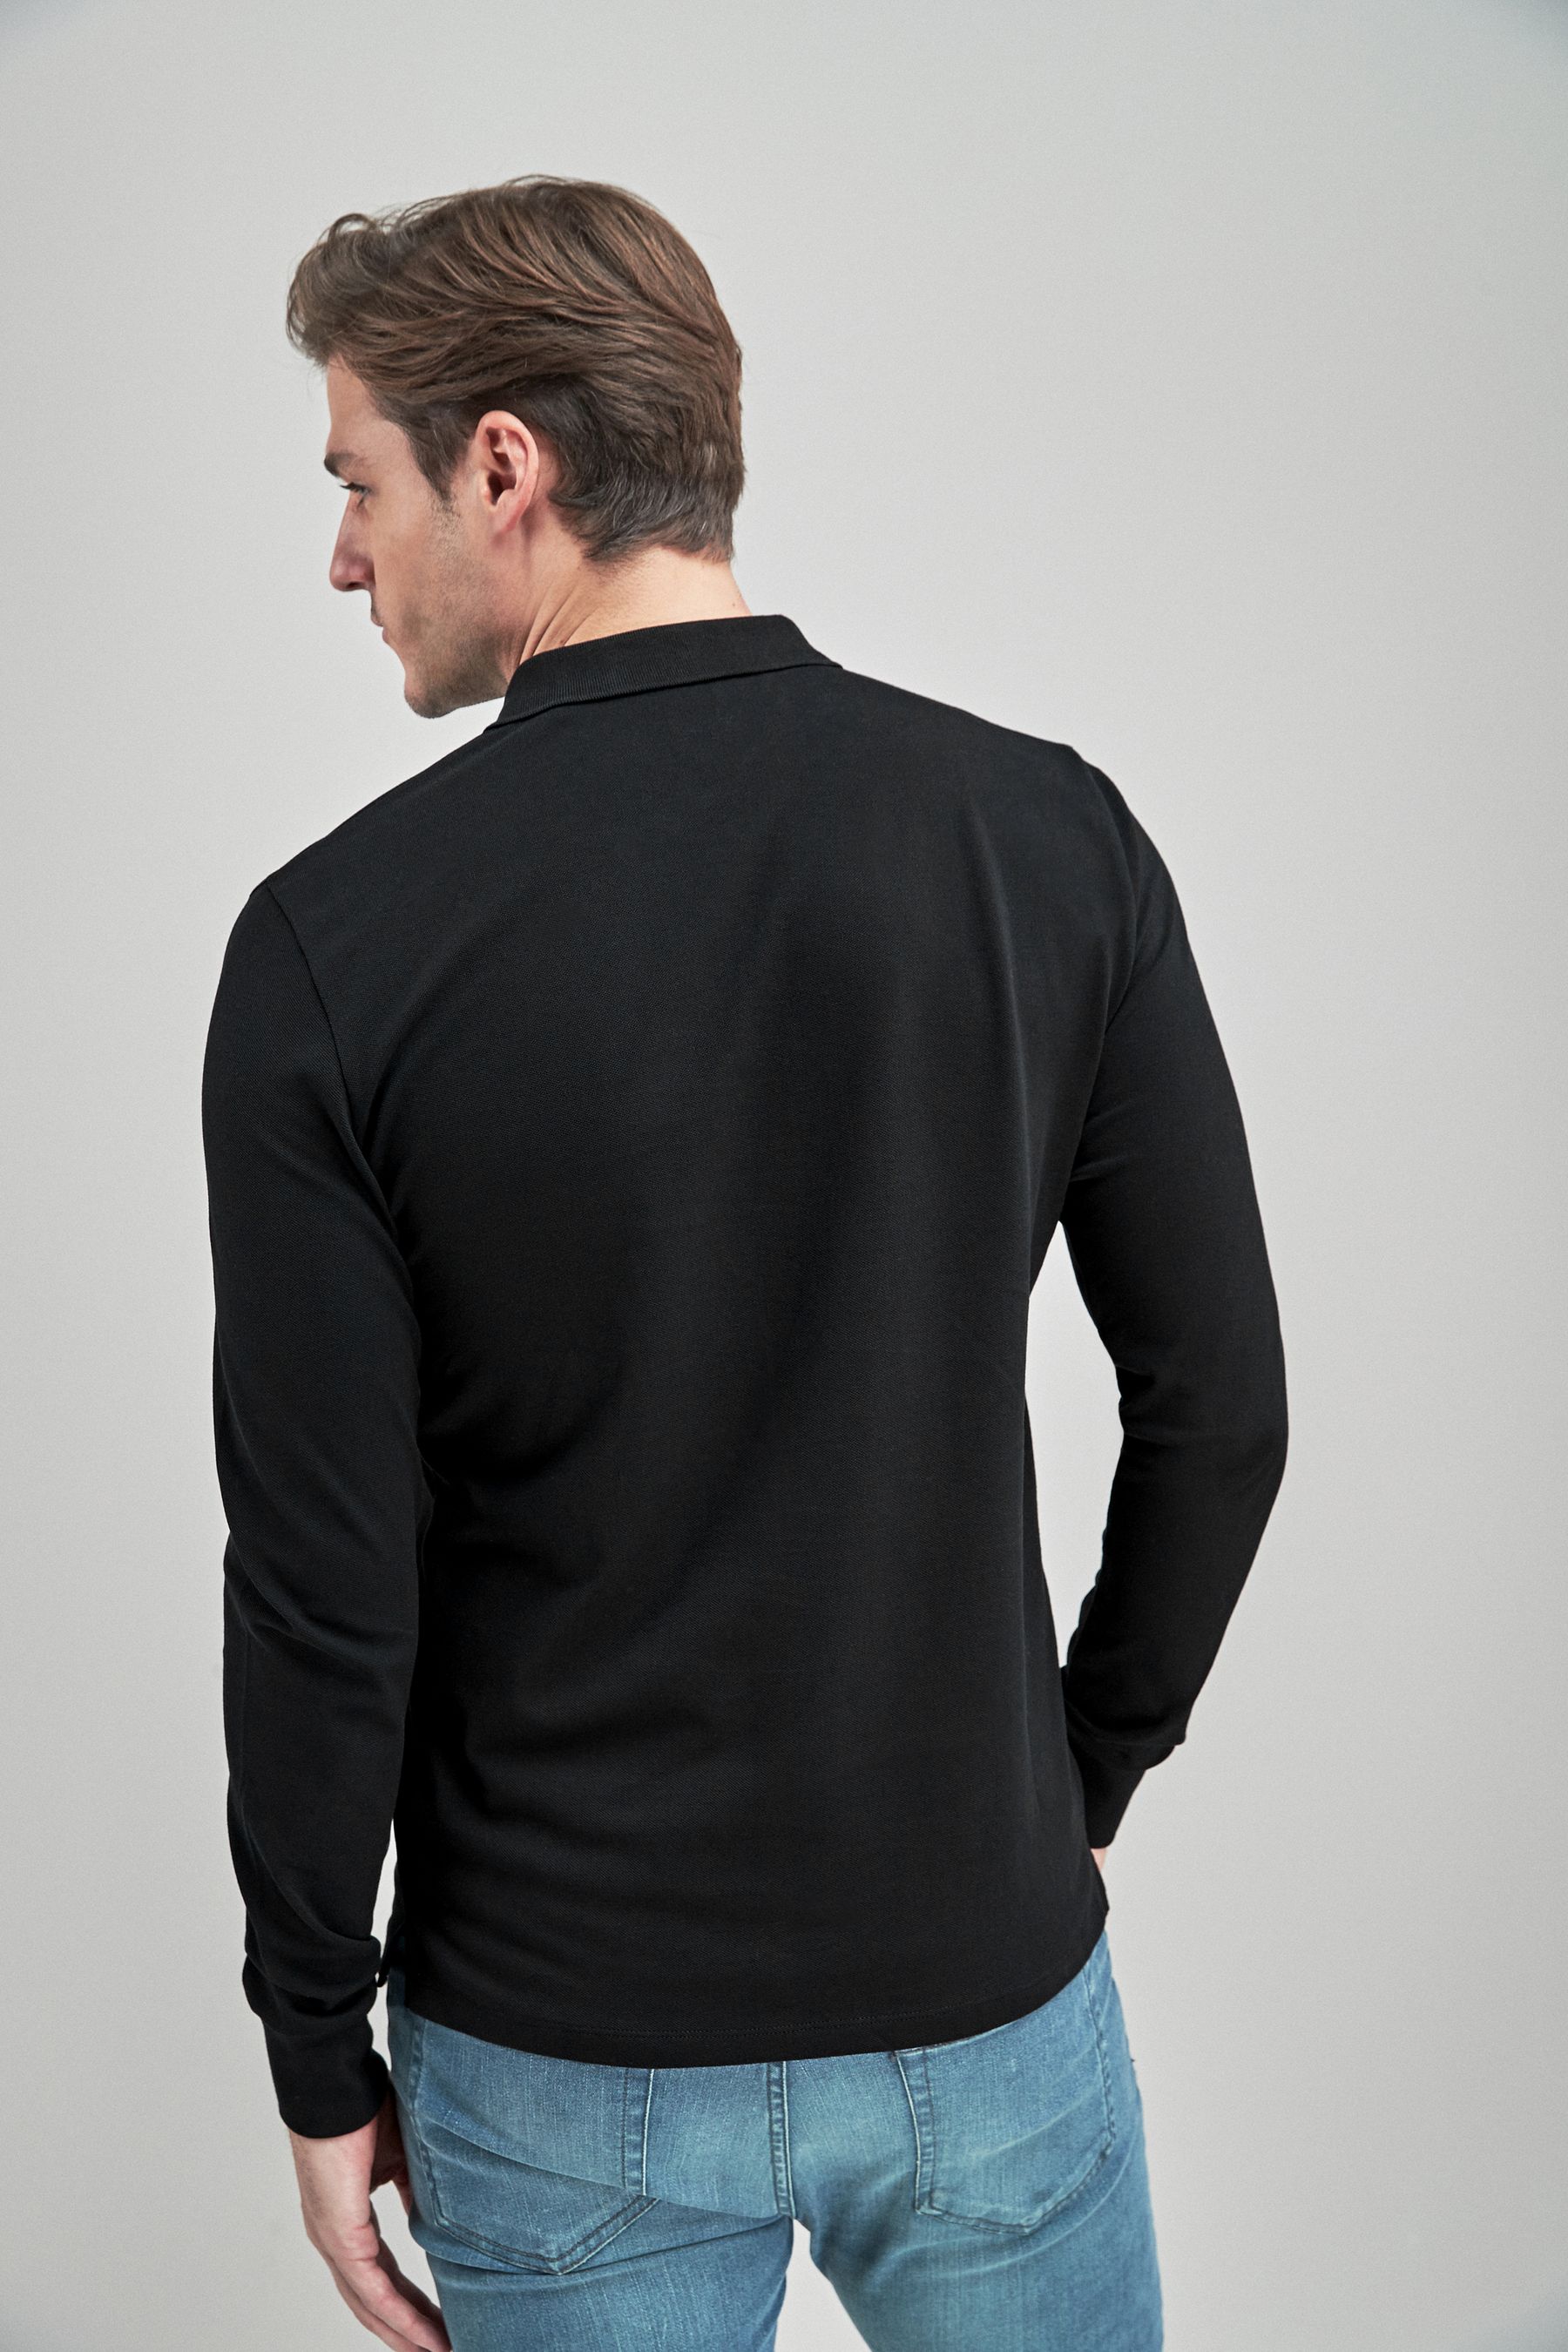 Buy Black Long Sleeve Pique Polo Shirt from the Next UK online shop